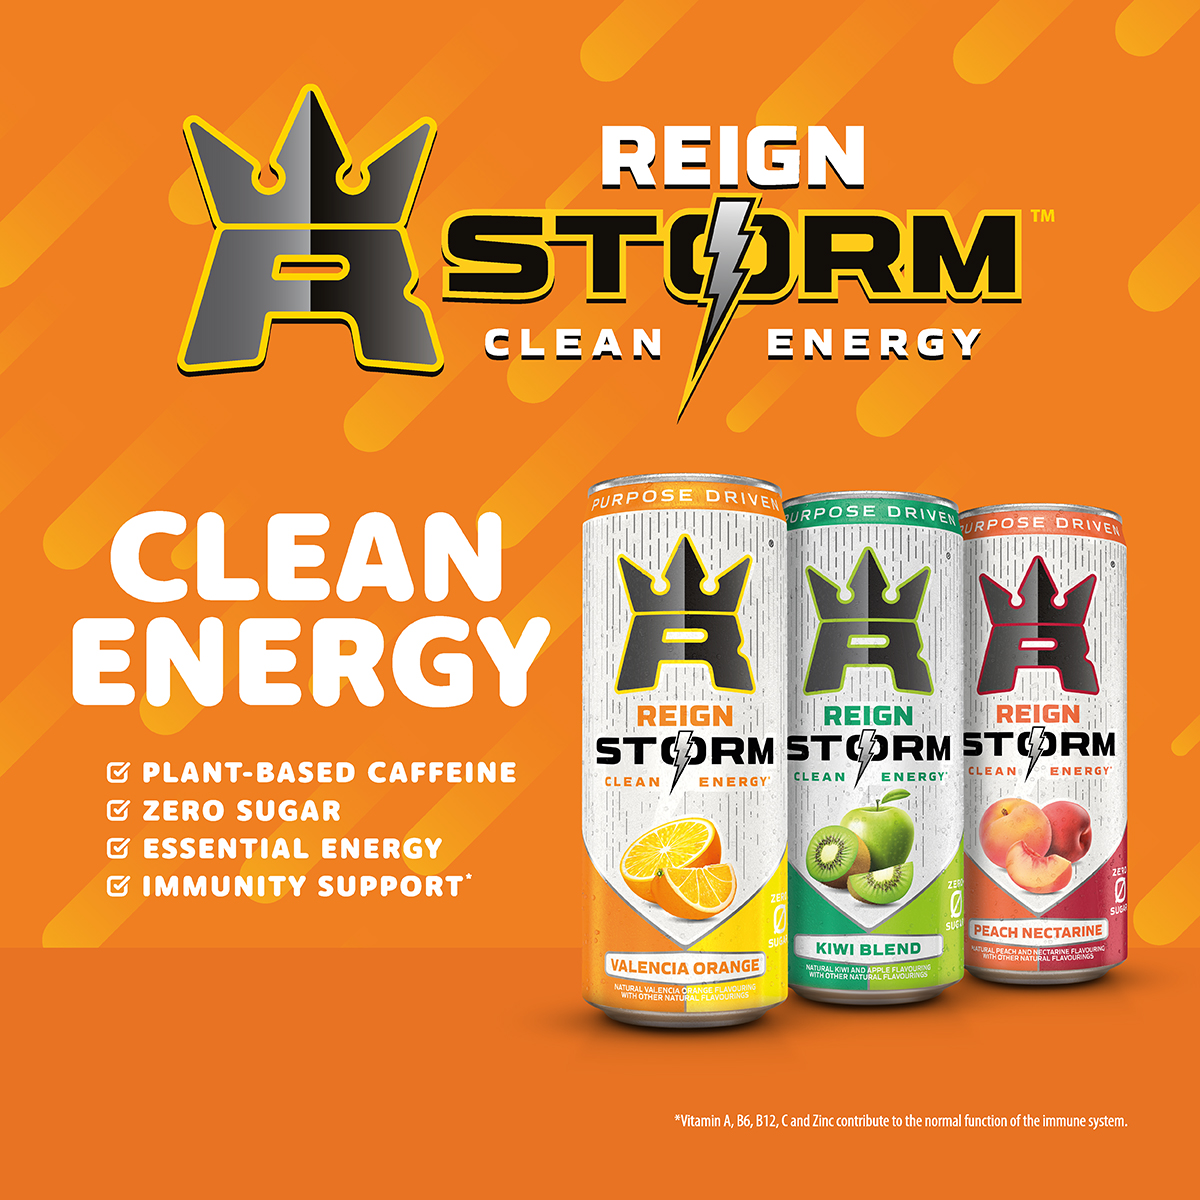 For the chance to win a case of your favourite Reign Storm flavour, tell us who you'd share it with in the comments below 👇 Don't forget to include #OneStopReign Good luck! #Competition #Win #Giveaway #ReignStorm #Reign